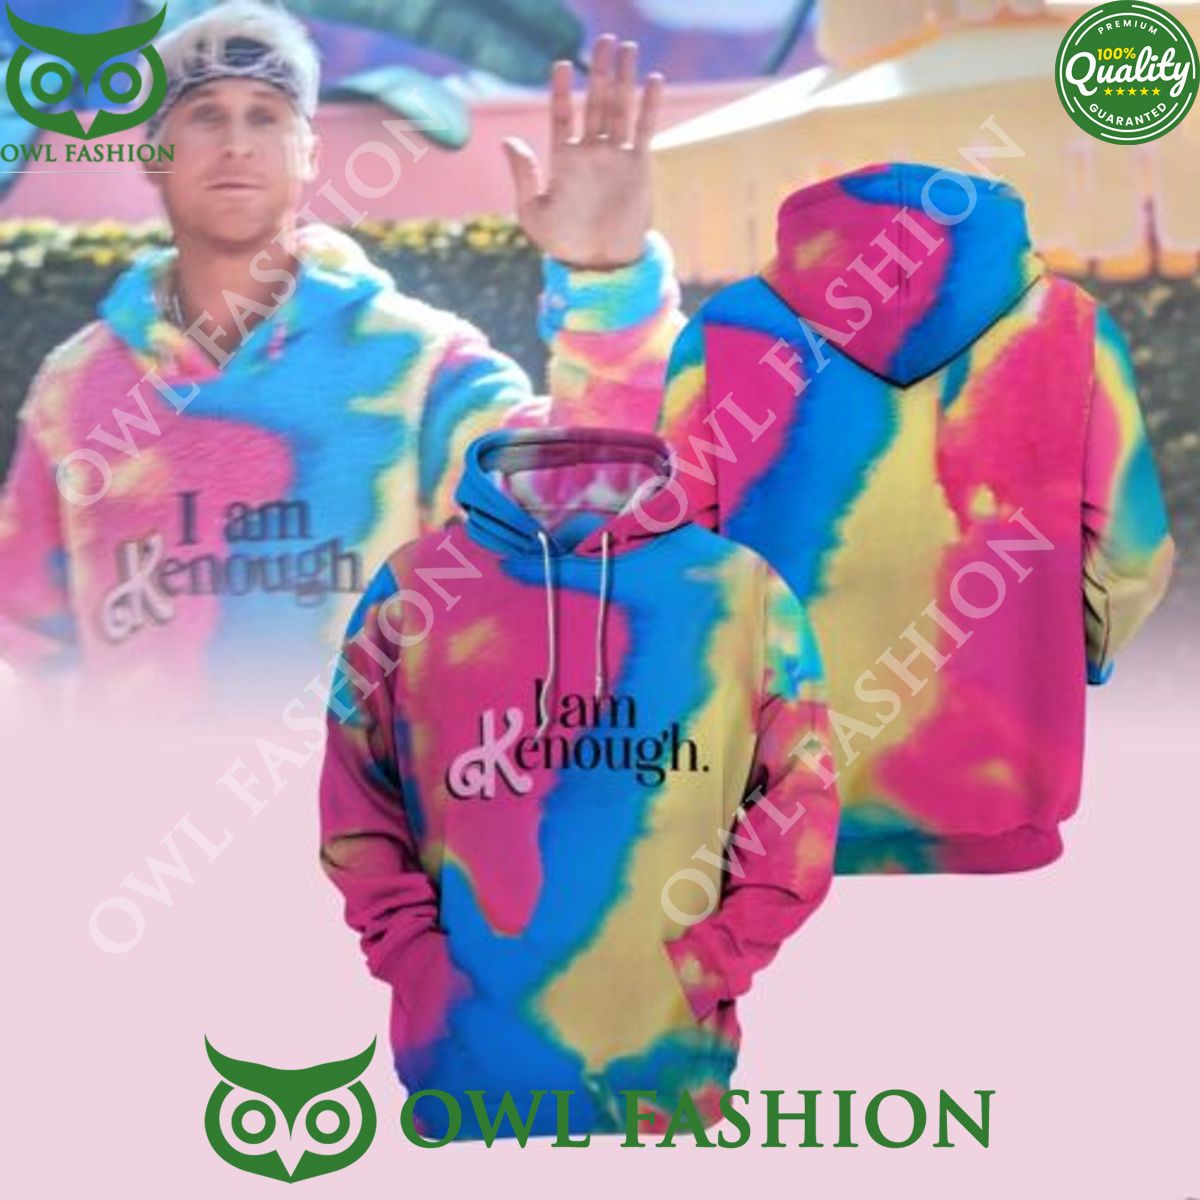 I Am Kenough Movie 3D Aop Hoodie The use of contrast is striking.